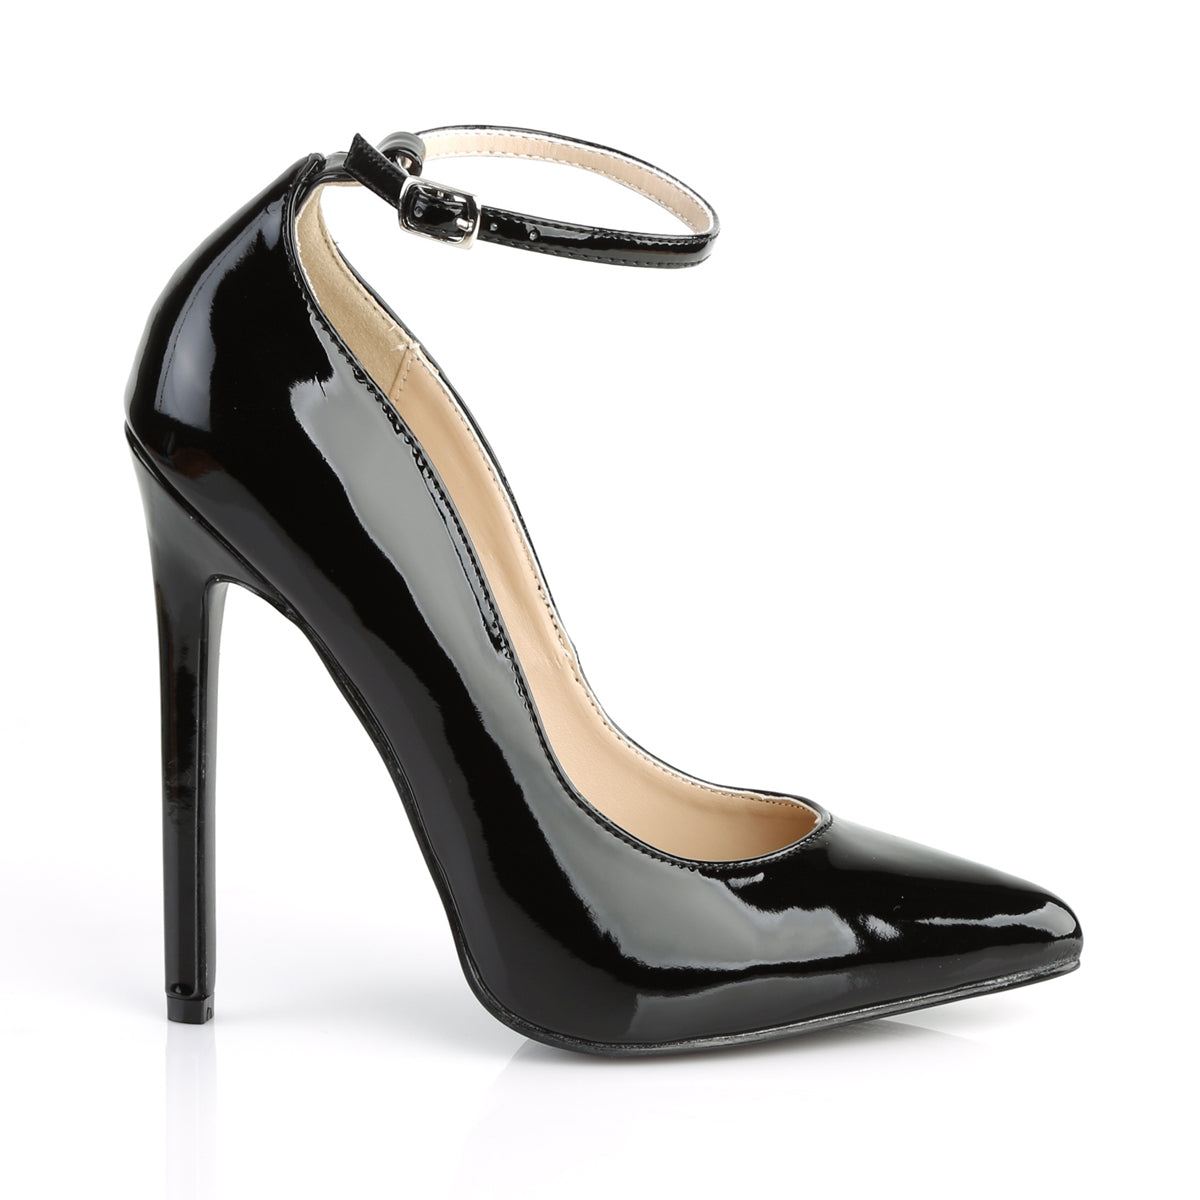 SEXY-23 Ankle Strap Pointed Toe High Heel